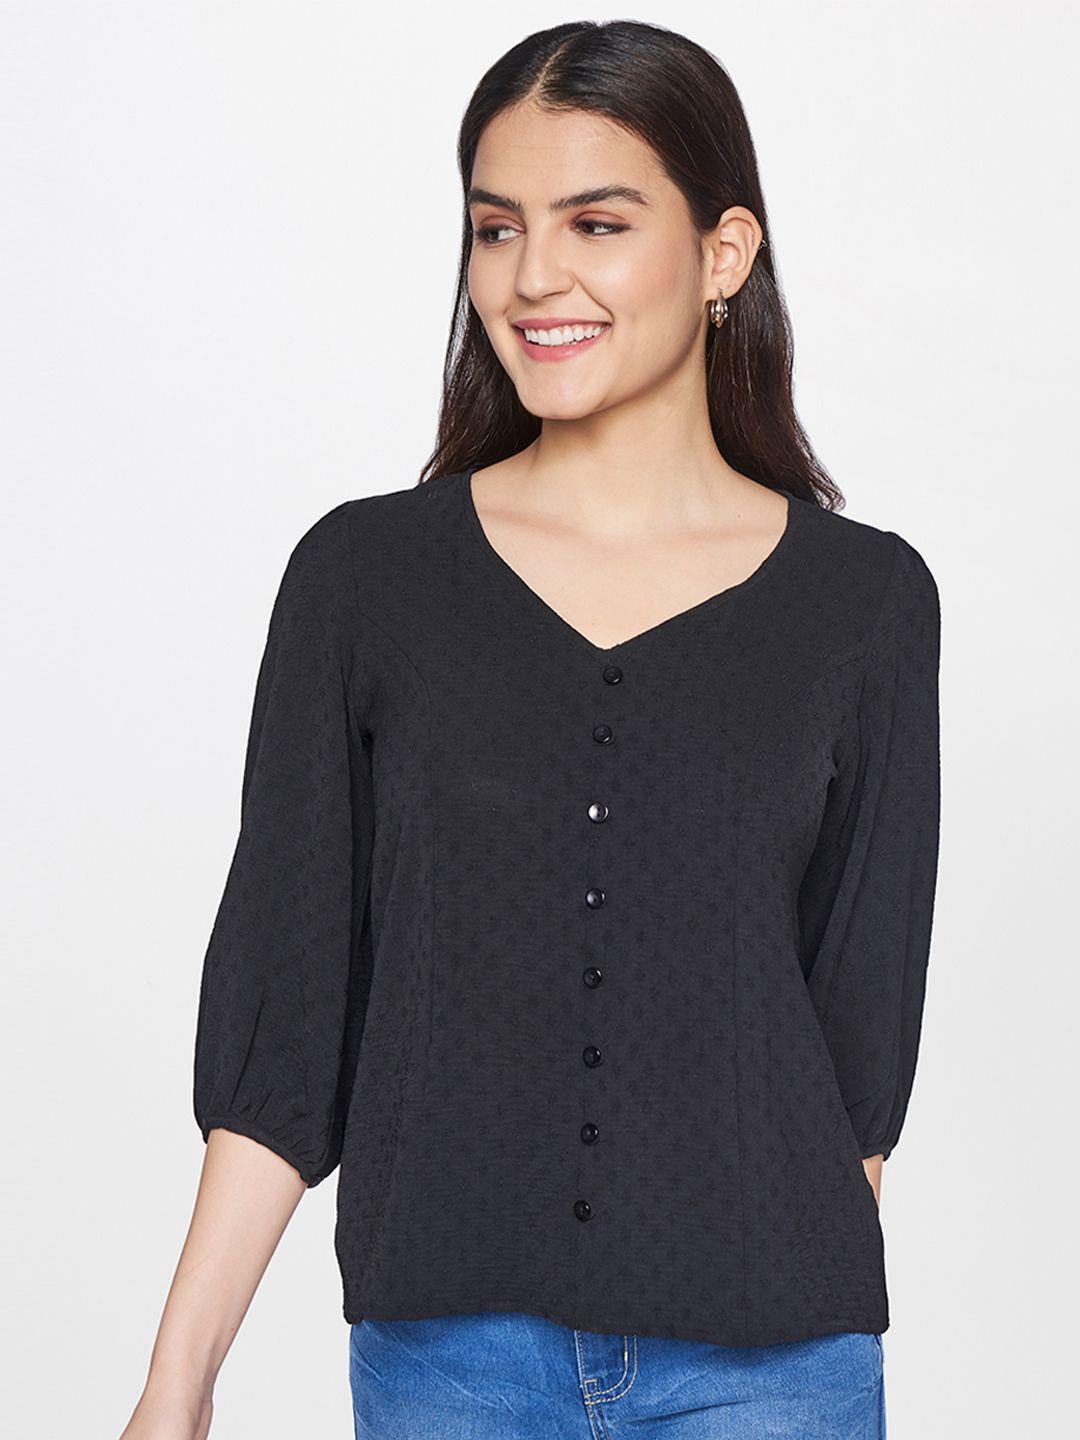 and-black-embroidered-top